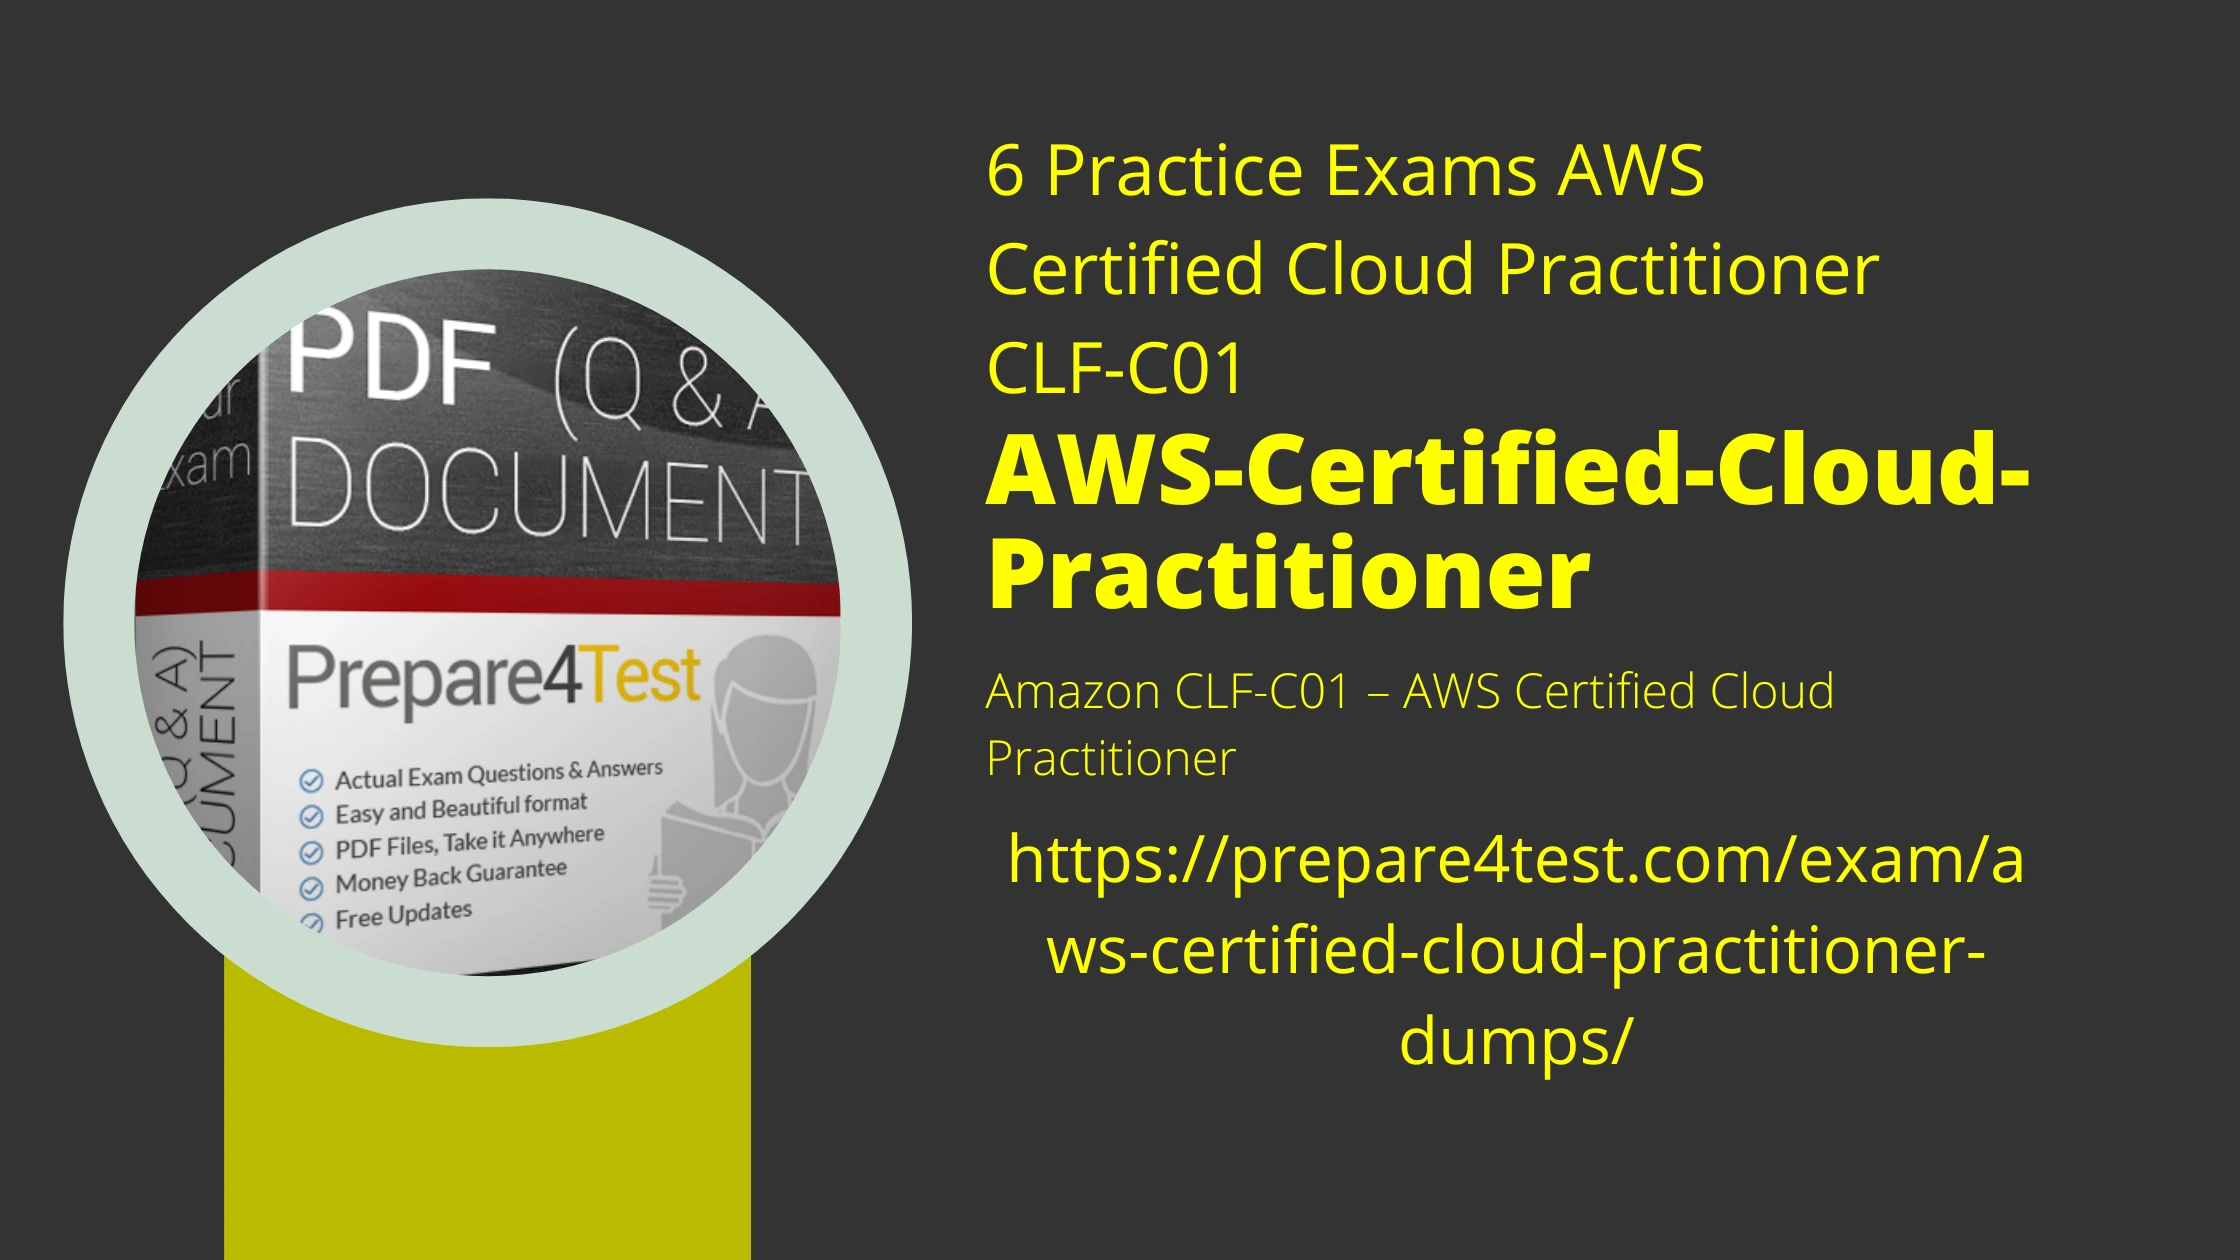 6 Practice Exams AWS Certified Cloud Practitioner CLF-C01 promotion